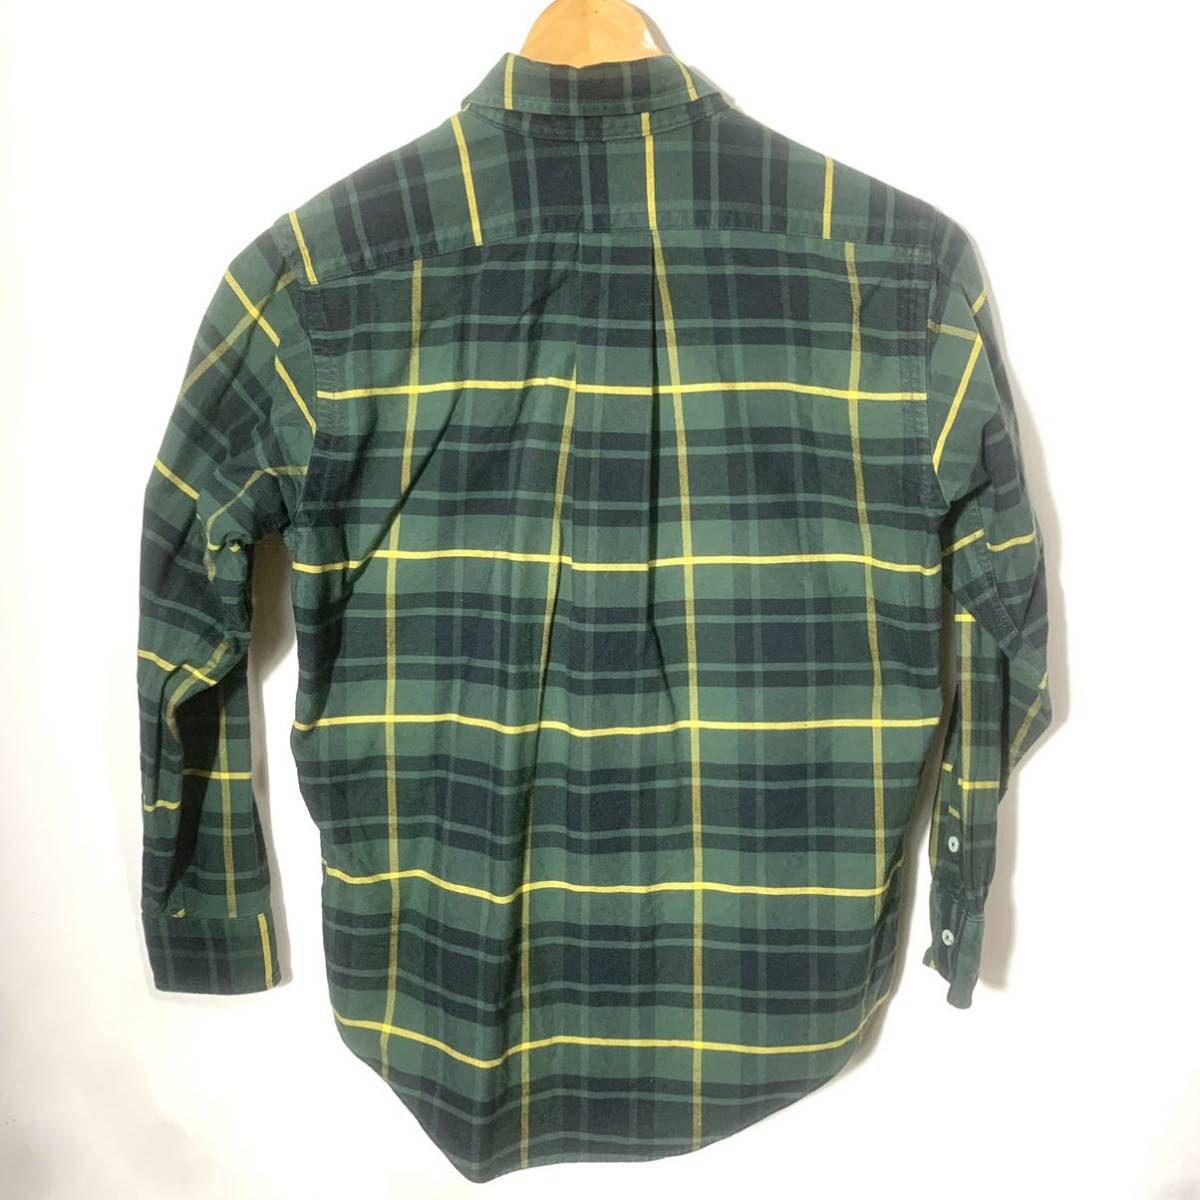 #80s 80 period USA made Vintage green tag POLO by Ralph Lauren Ralph Lauren check pattern button down long sleeve shirt old clothes boys M#